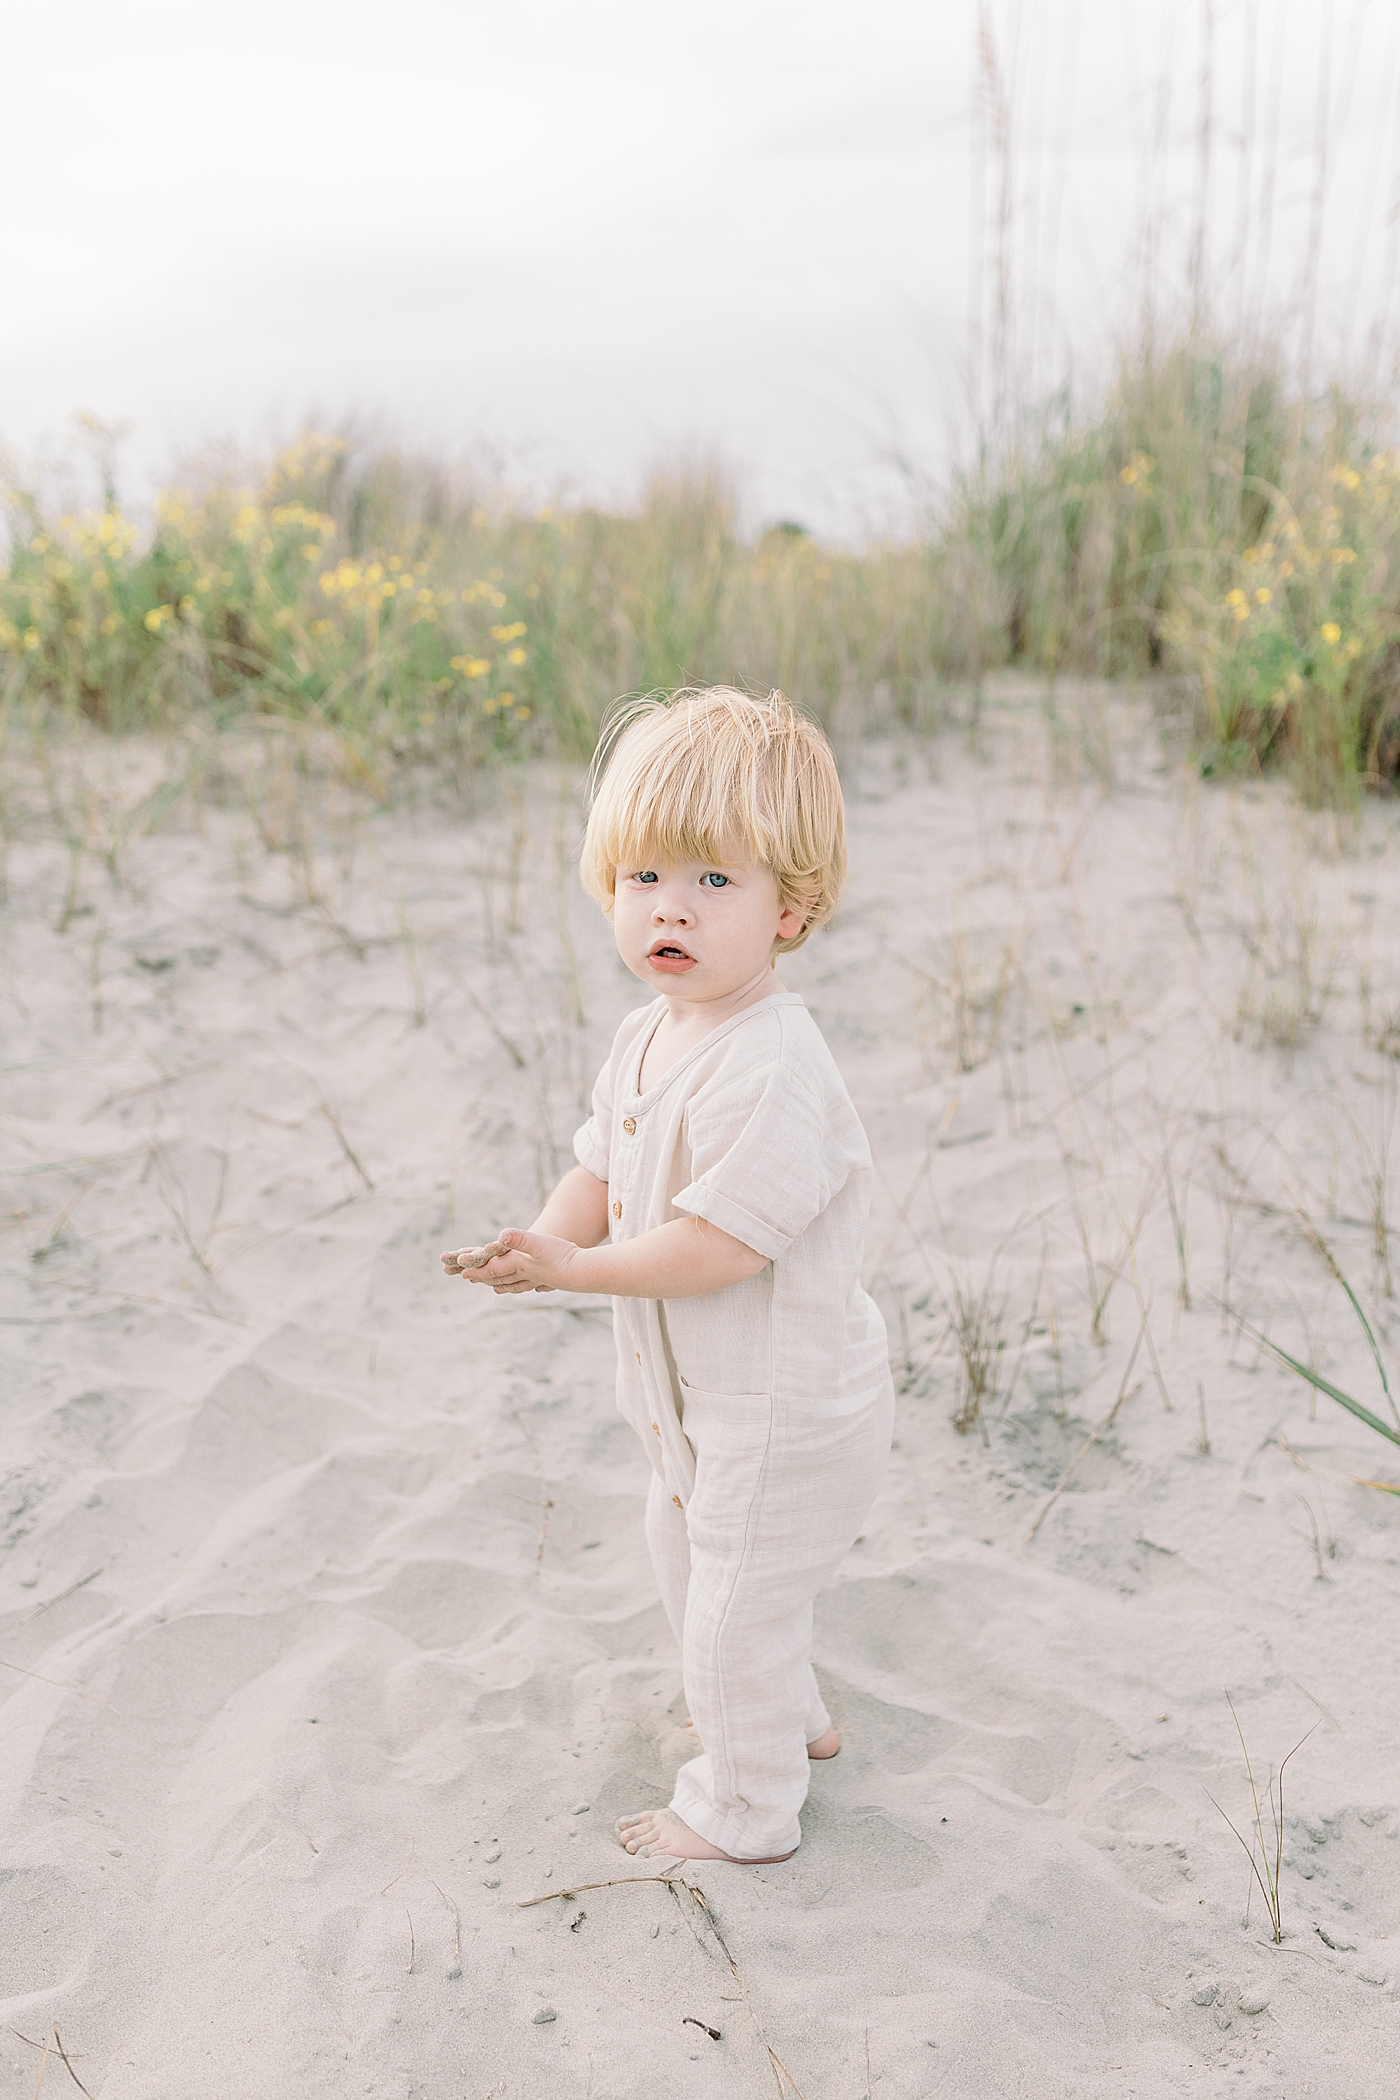 Little boy with blonde hair playing on the beach | Photo by Caitlyn Motycka Photography